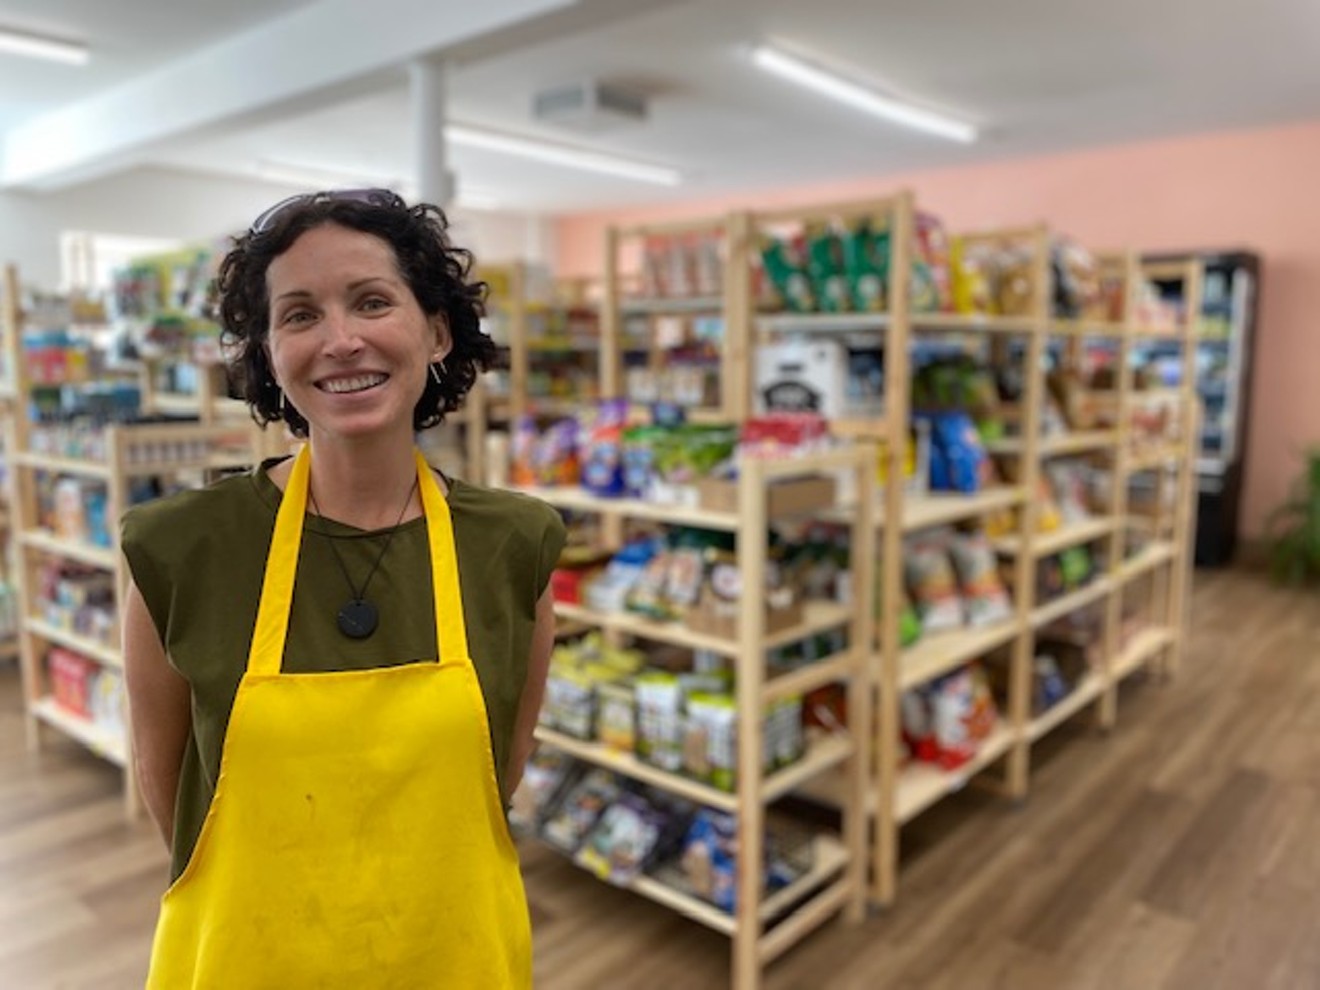 Andrea Leo opened Sun Market as a bodega meets high-end market in July.